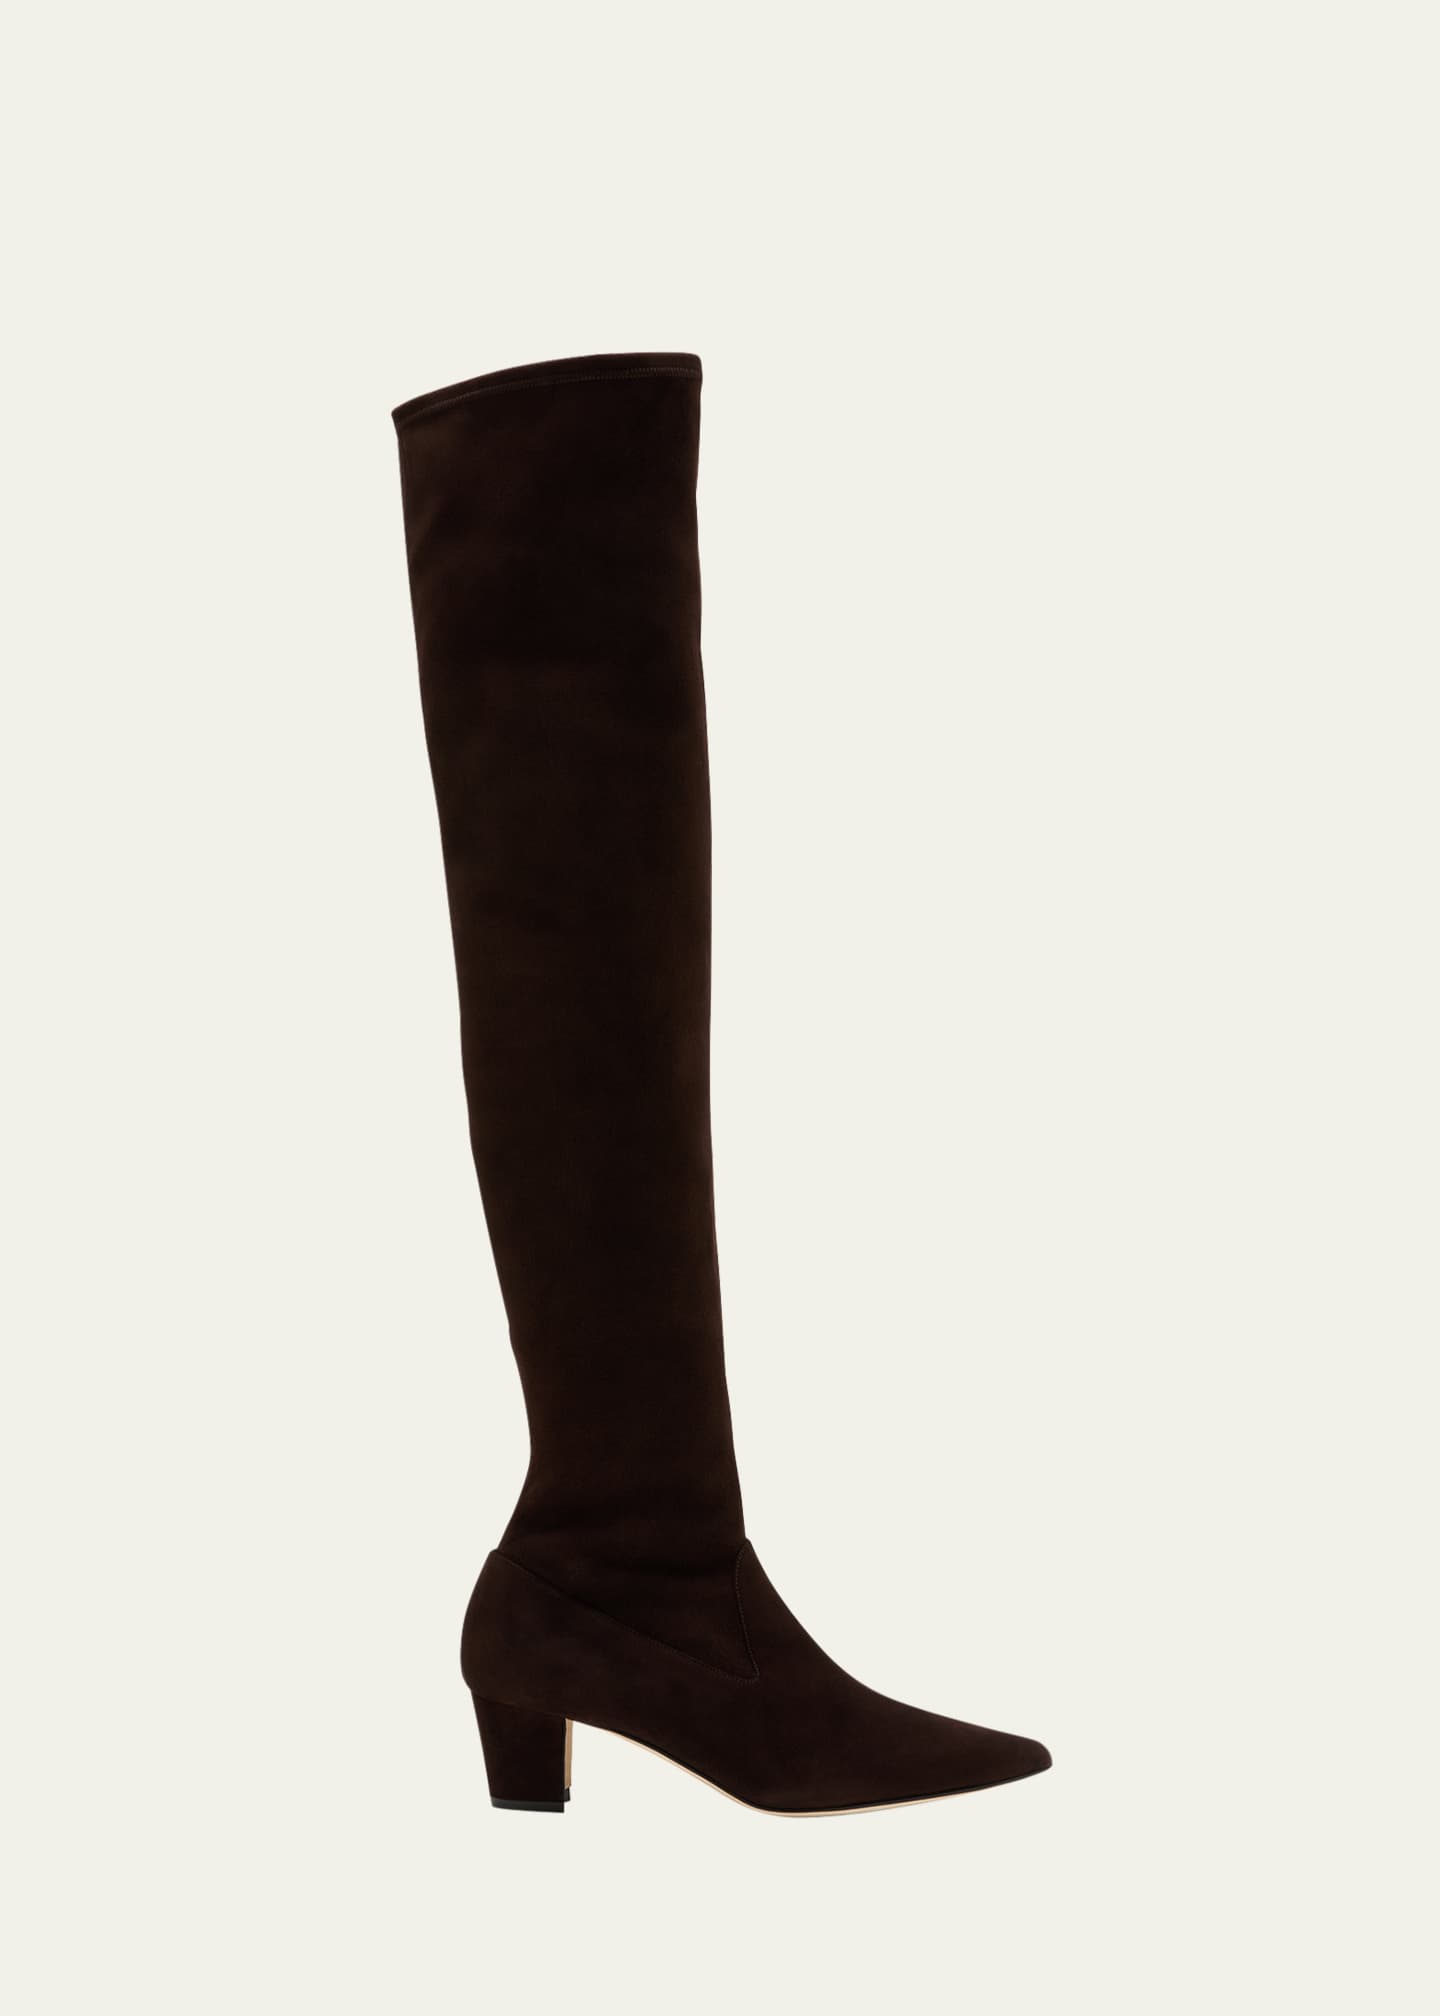 Manolo Blahnik Lupasca Suede Over-The-Knee Boots - Bergdorf Goodman